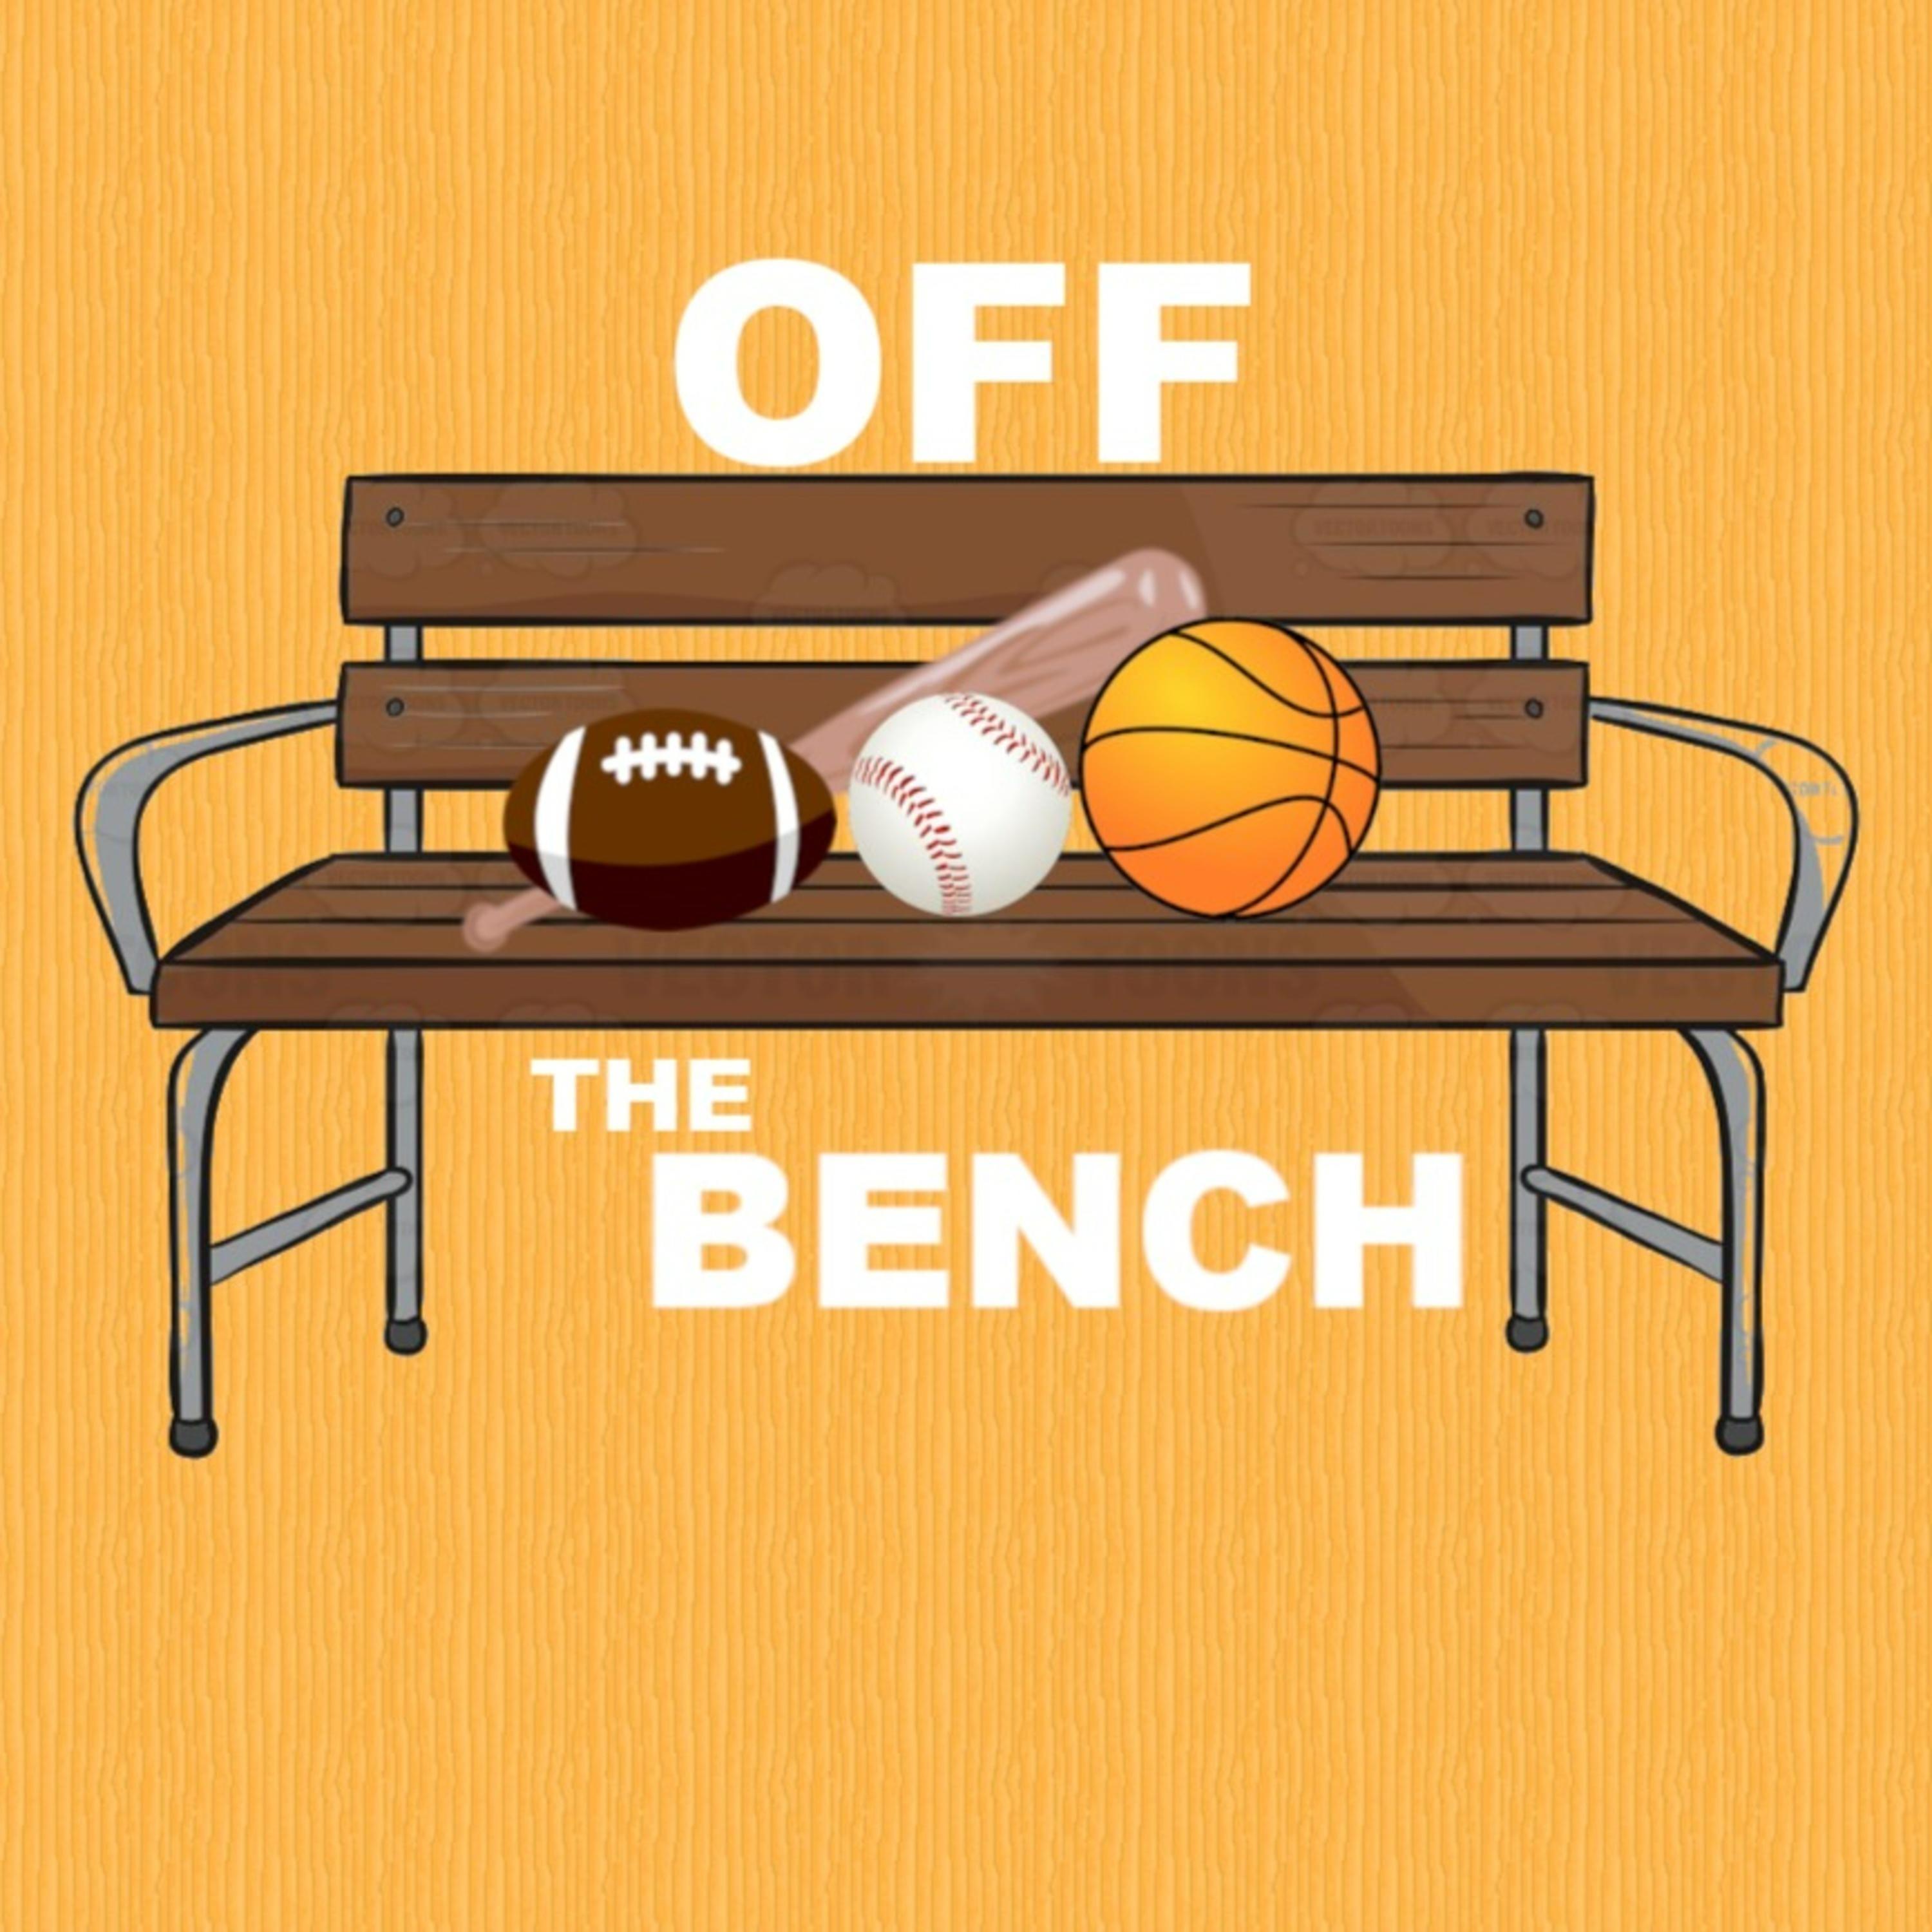 Off the bench